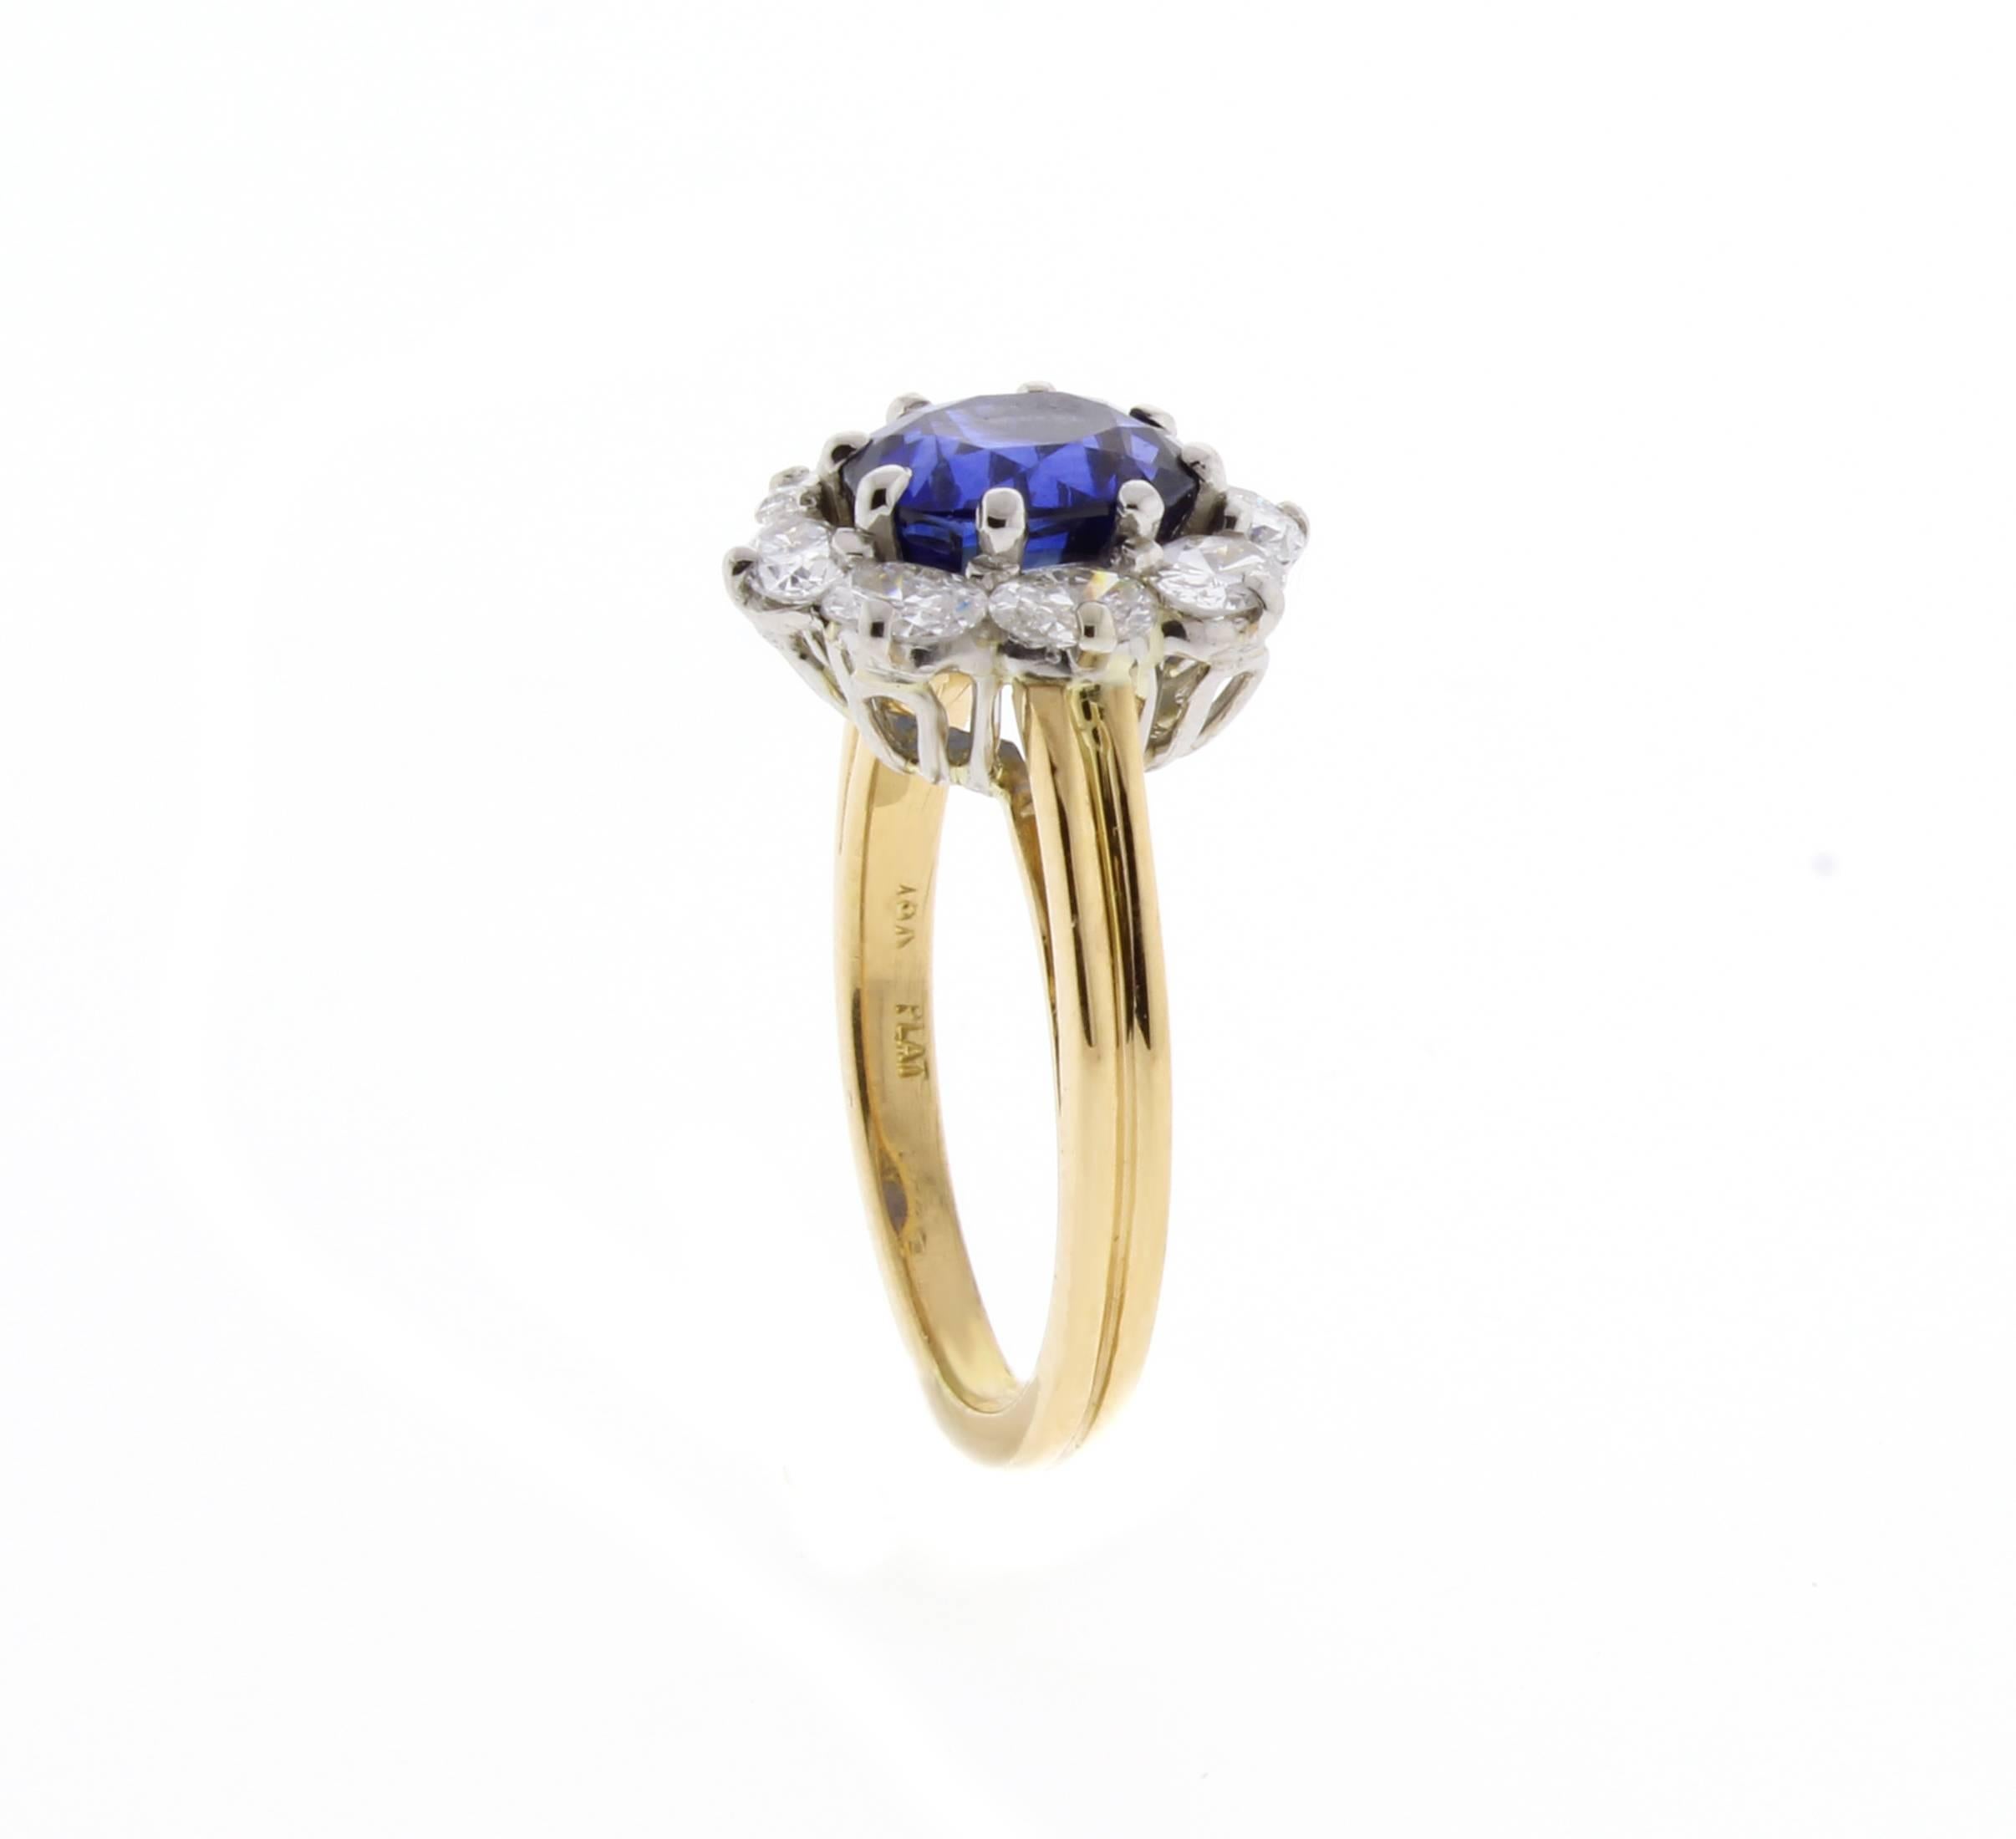 From the New York workrooms of Oscar Heyman, an oval diamond cluster ring. The center oval sapphires weighs 2.05 carats and is surrounded by 8 oval diamonds weighing  .80 carats. The diamonds are G color and VS1 clarity. Set in 18 karat and